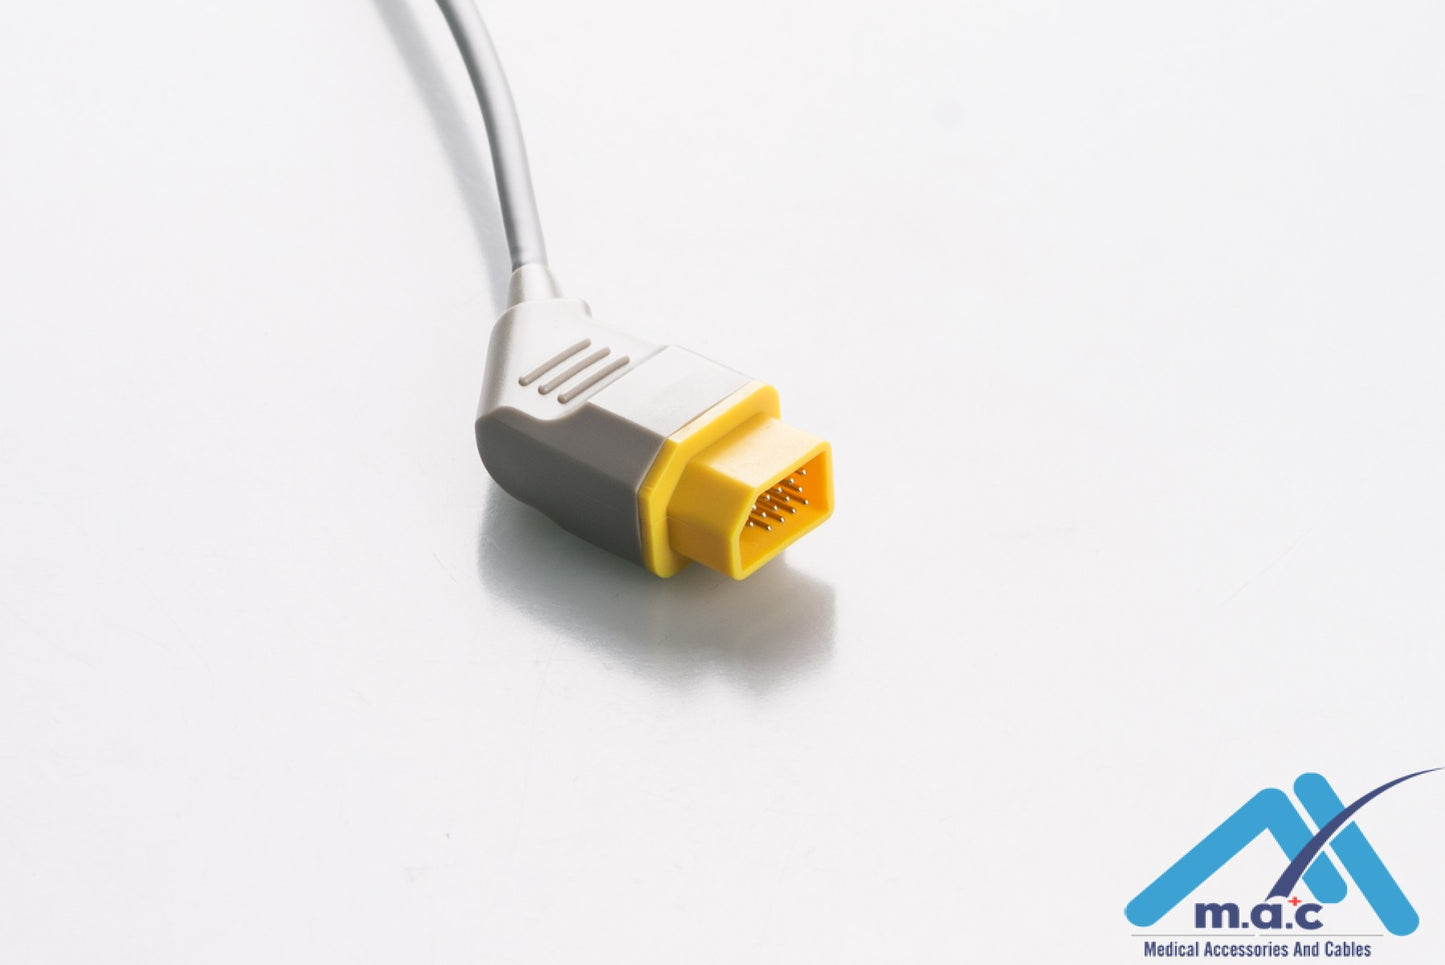 IBP Adapter Cable For Transducer BCM-NK2-MX BCM-NK2-ED BCM-NK2-UT BCM-NK2-BD BCM-NK2-MX1 BCM-NK2-BB